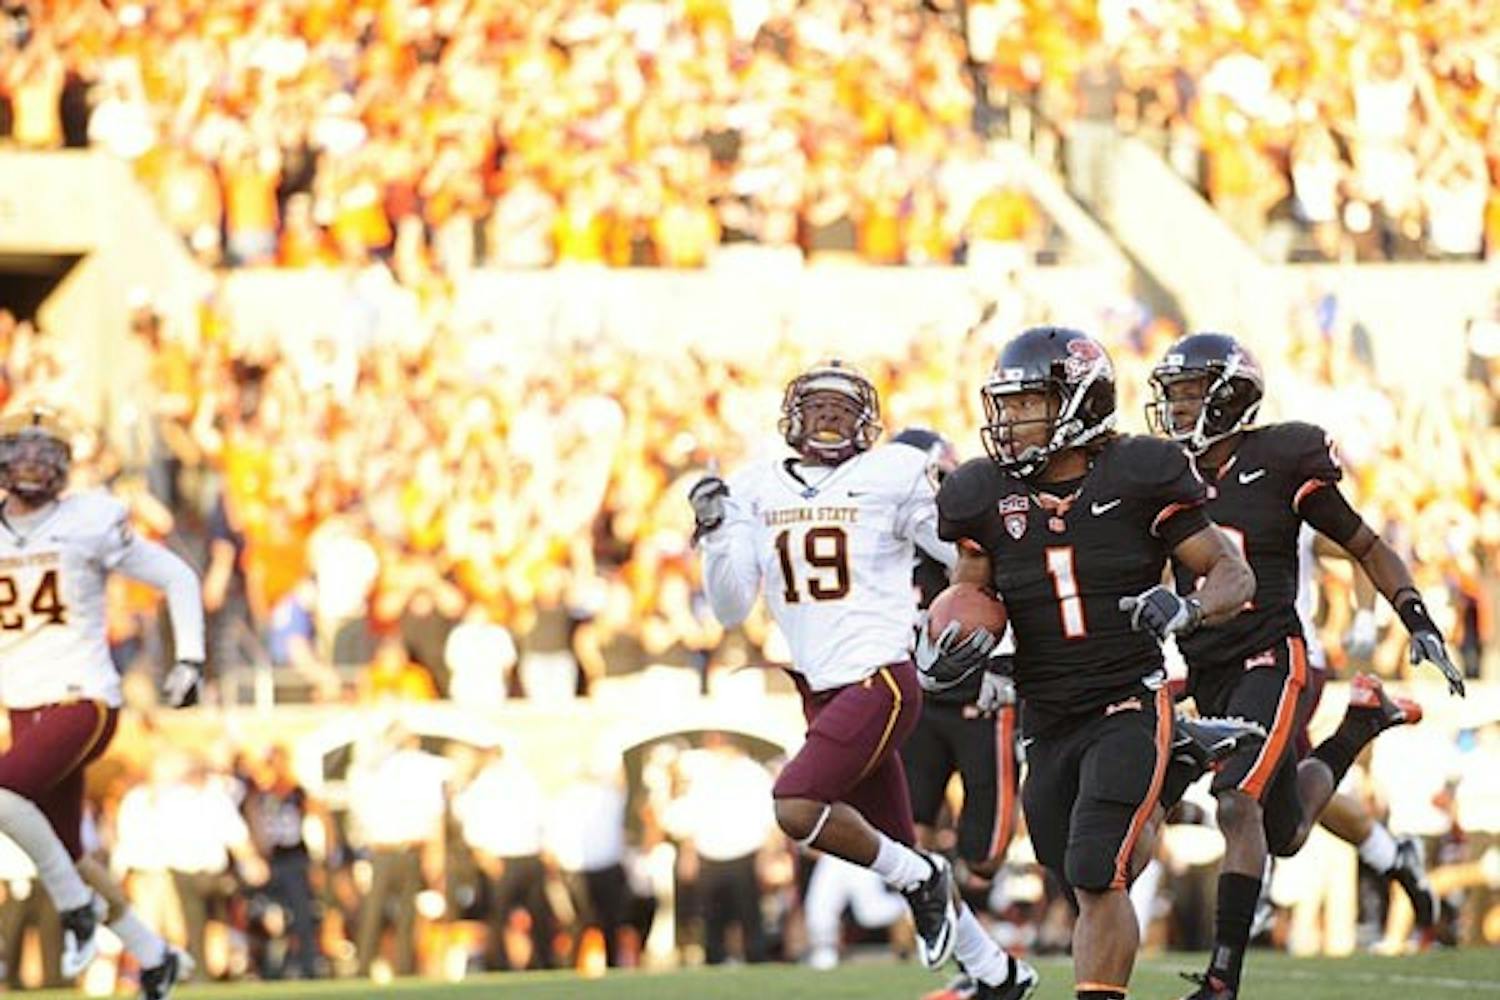 BREAKING AWAY: Oregon State junior back Jacquizz Rodgers carries the ball against ASU on Saturday. The Beavers got the win 31-28 and Rodgers finished with 54 yards and two touchdowns. (Photo COurtesy of the Daily Barometer)